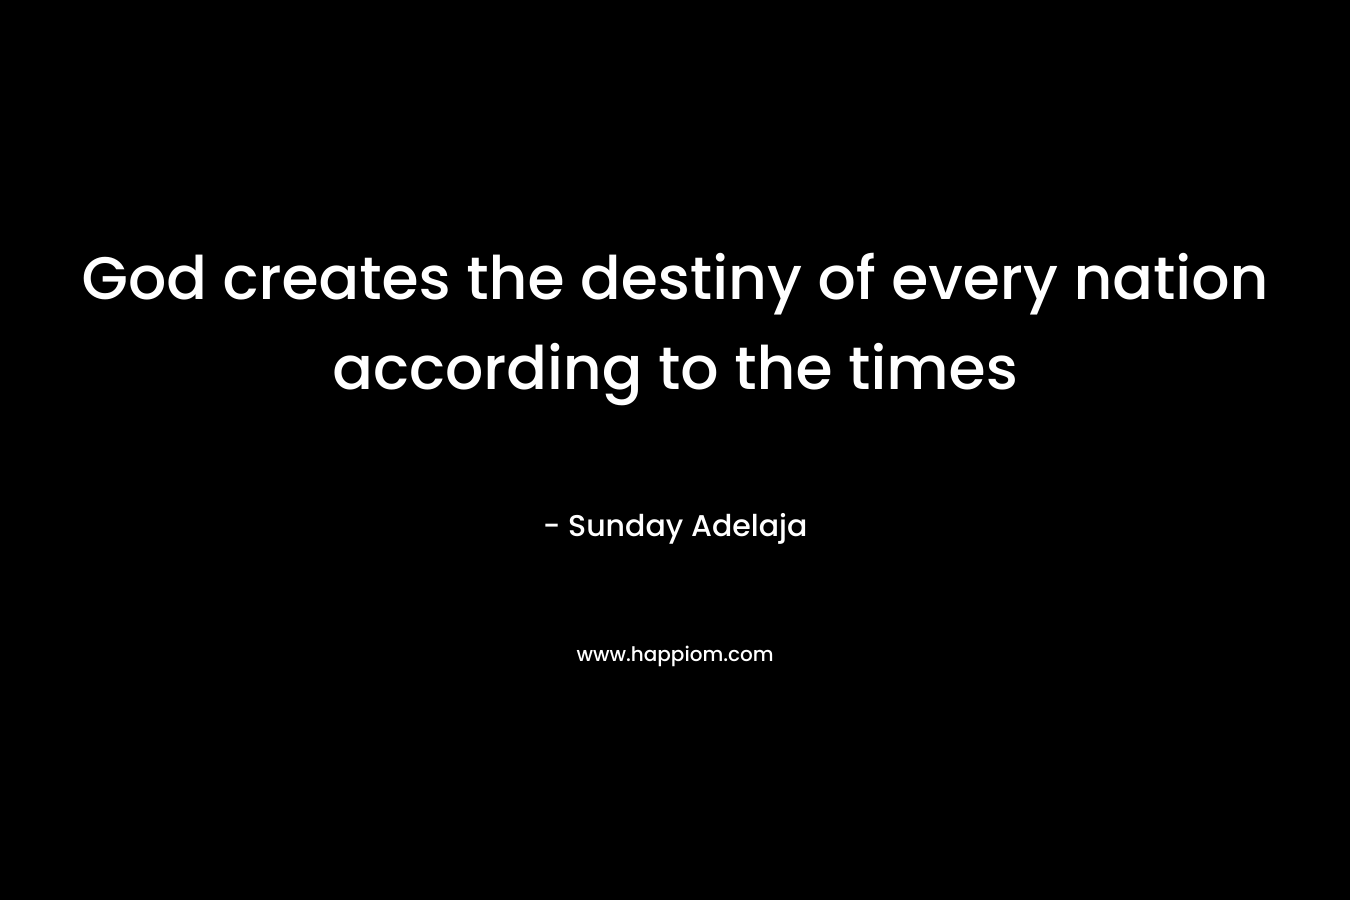 God creates the destiny of every nation according to the times